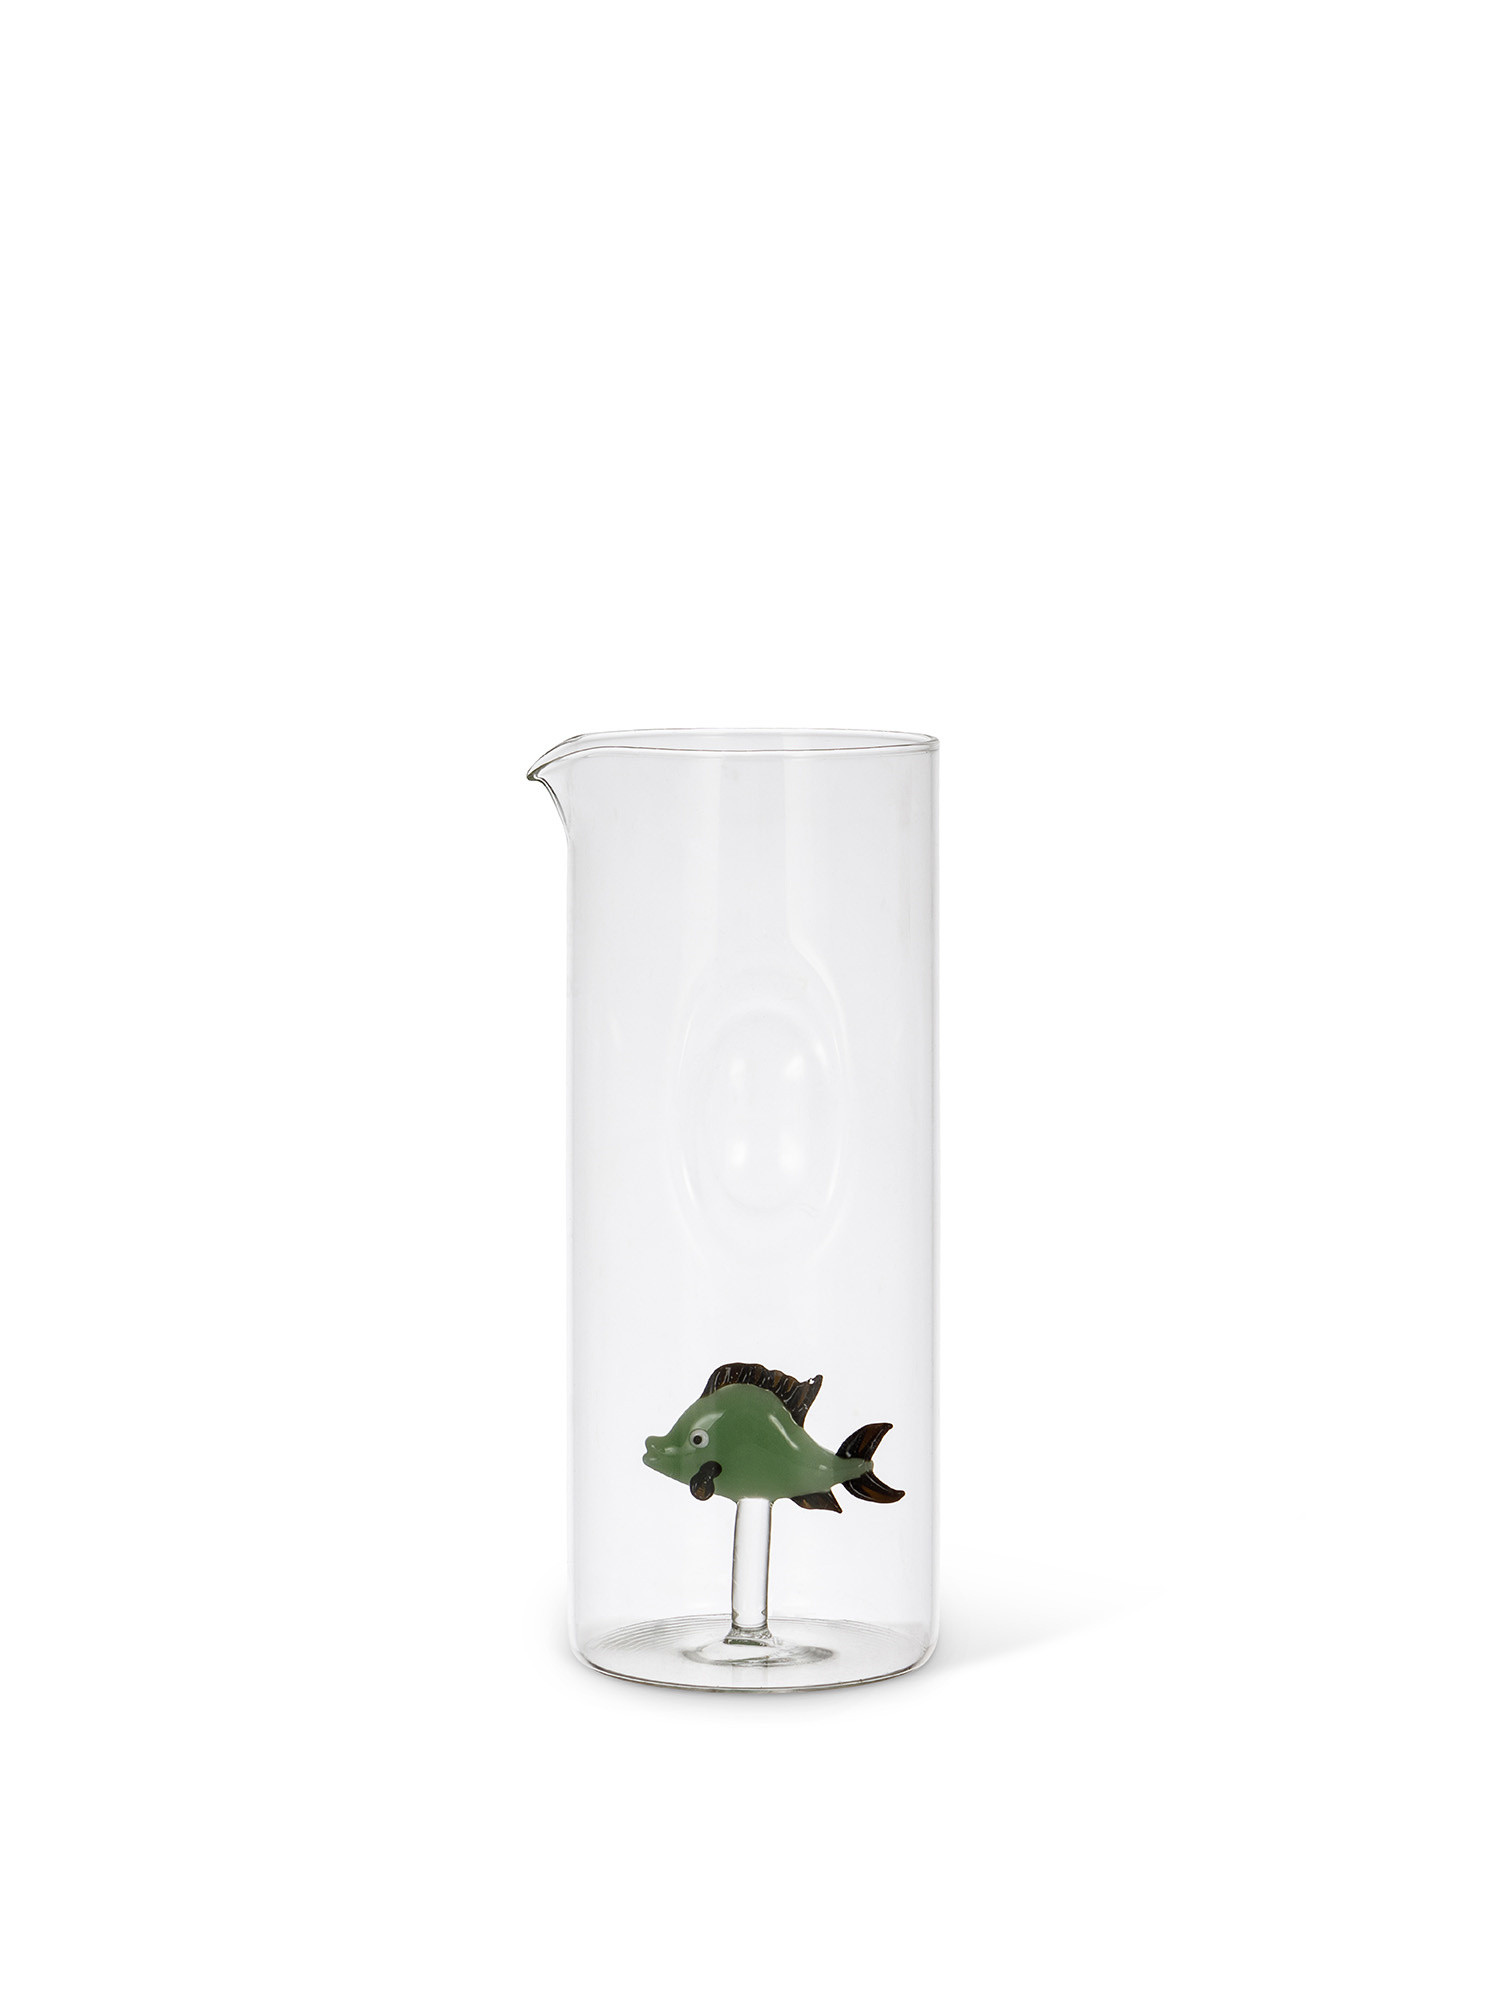 Glass carafe with green fish detail, Transparent, large image number 0